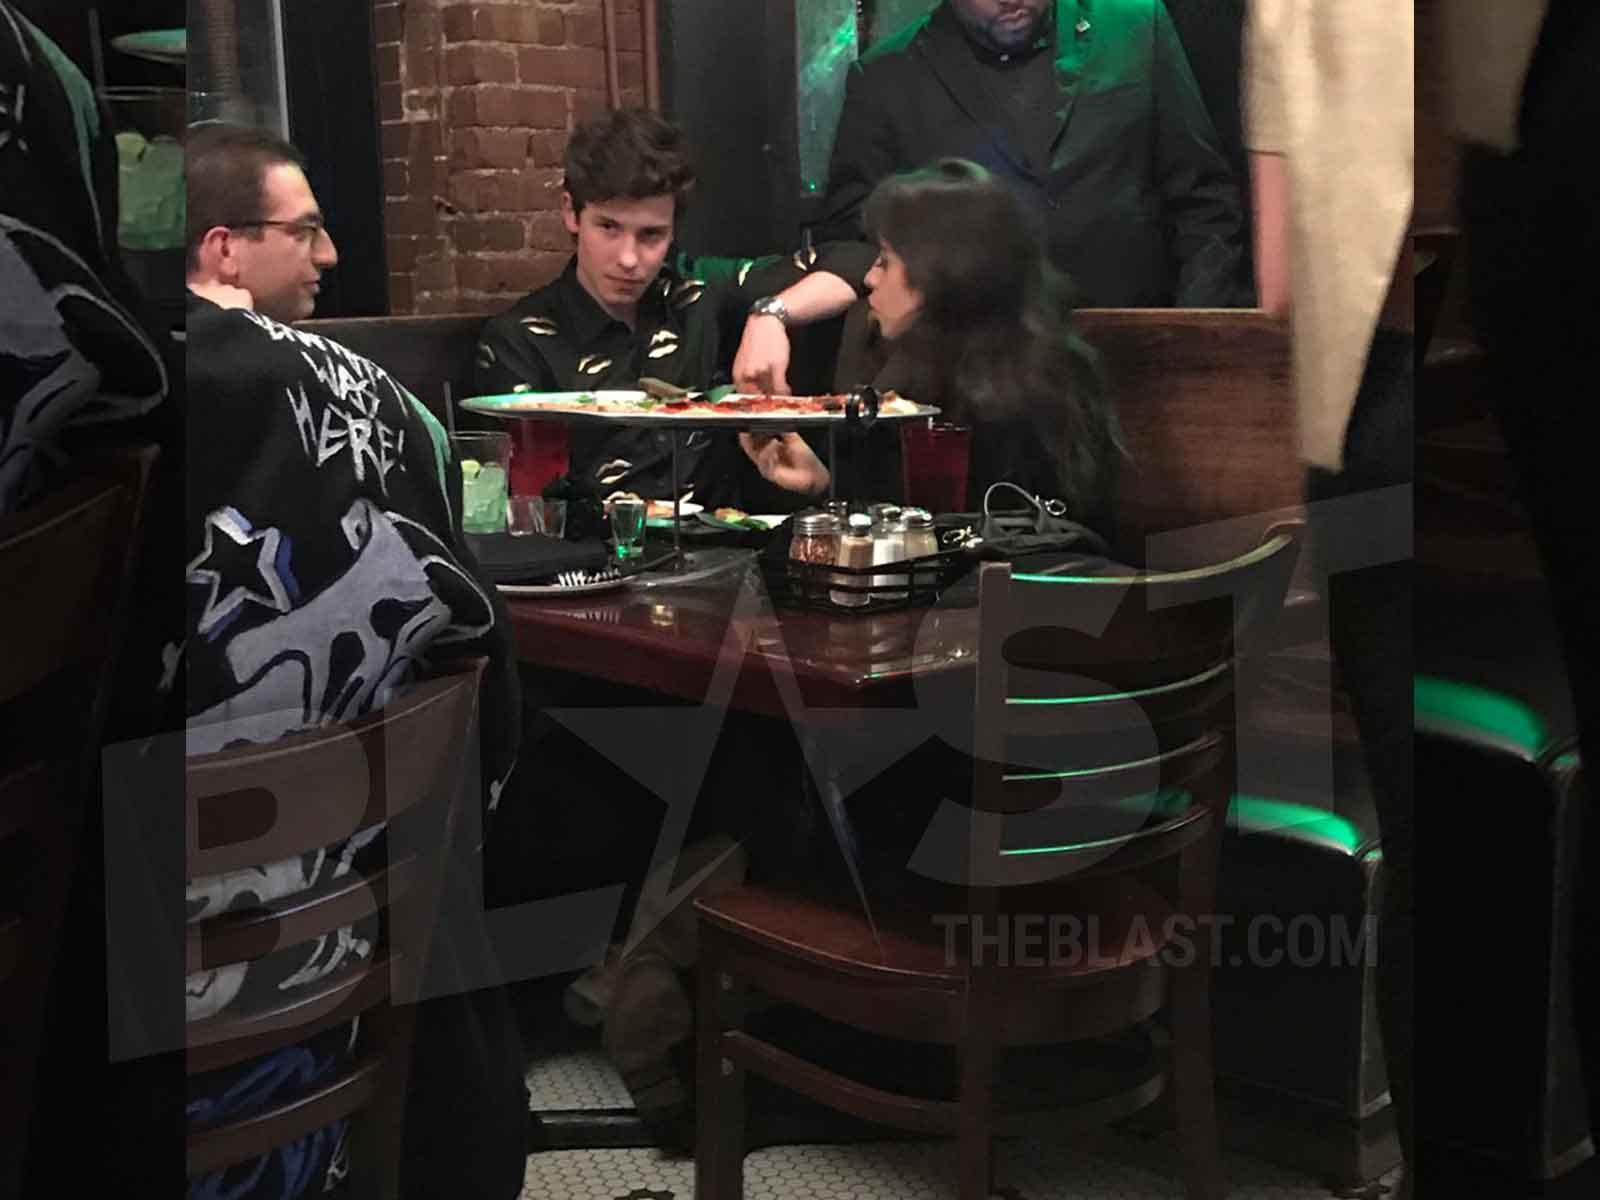 ‘BFFs’ Shawn Mendes and Camila Cabello Cozied Up On What Looks Like a Date